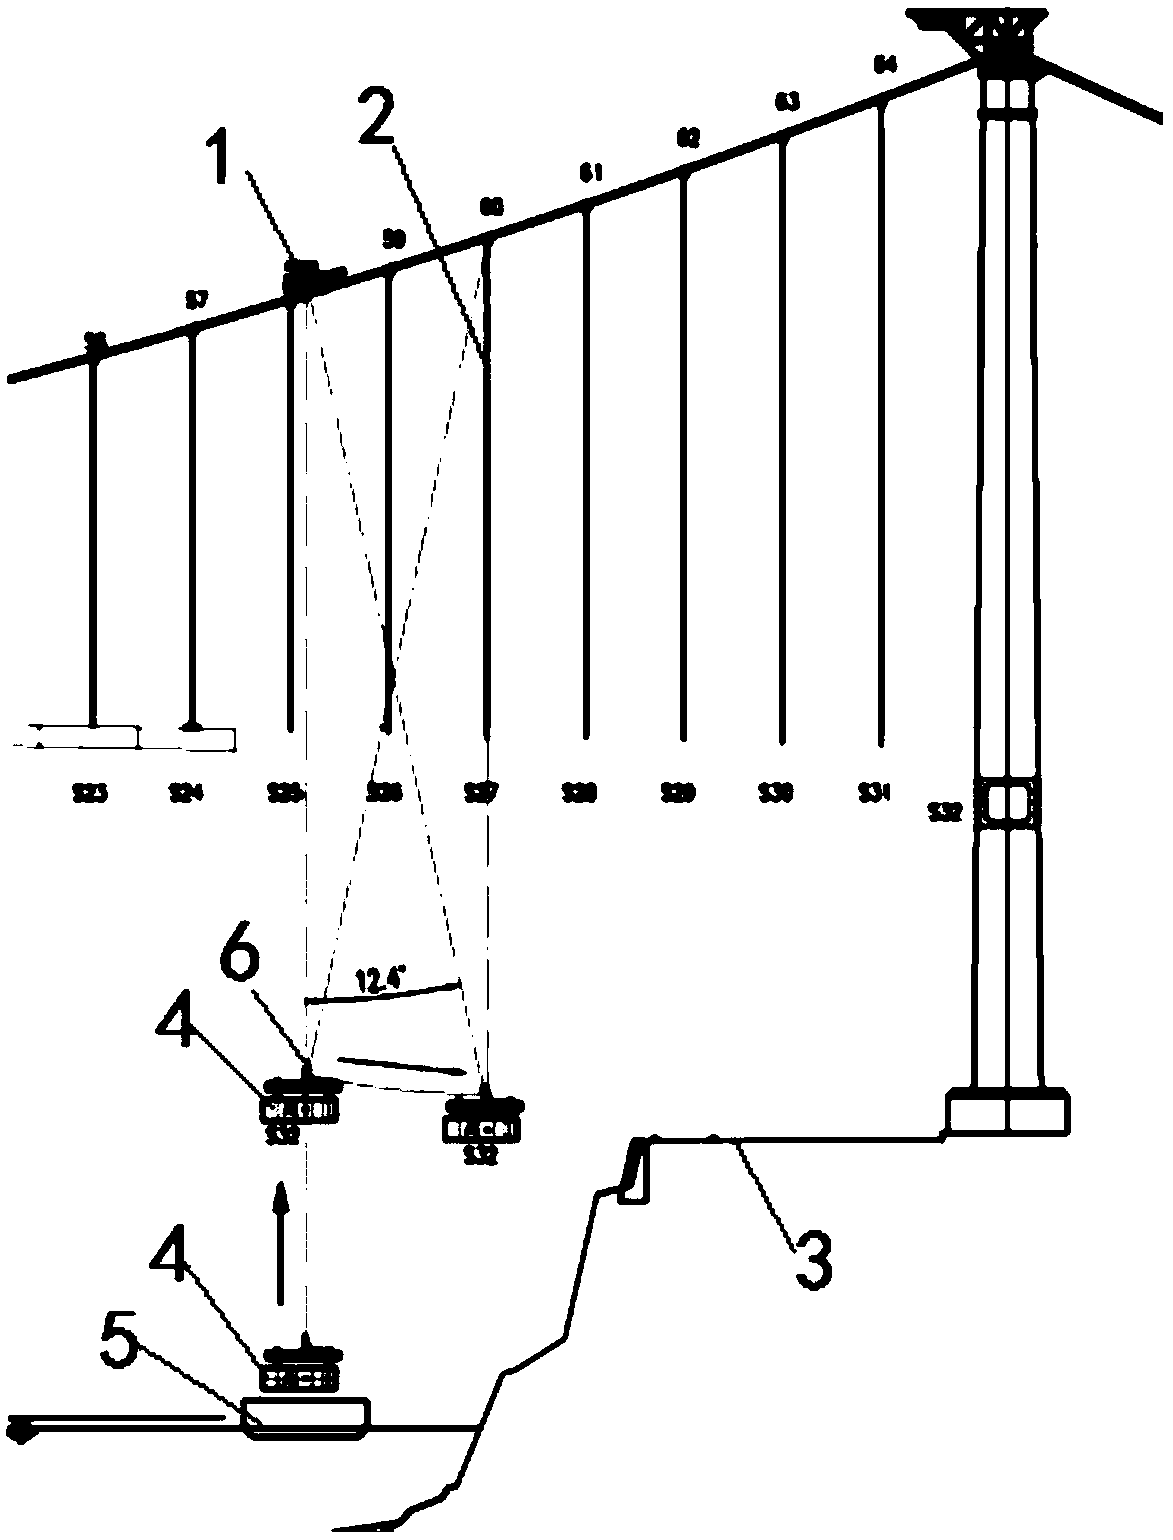 Installation device and method for swinging and moving long slings of girder sections on bank slopes of suspension bridges